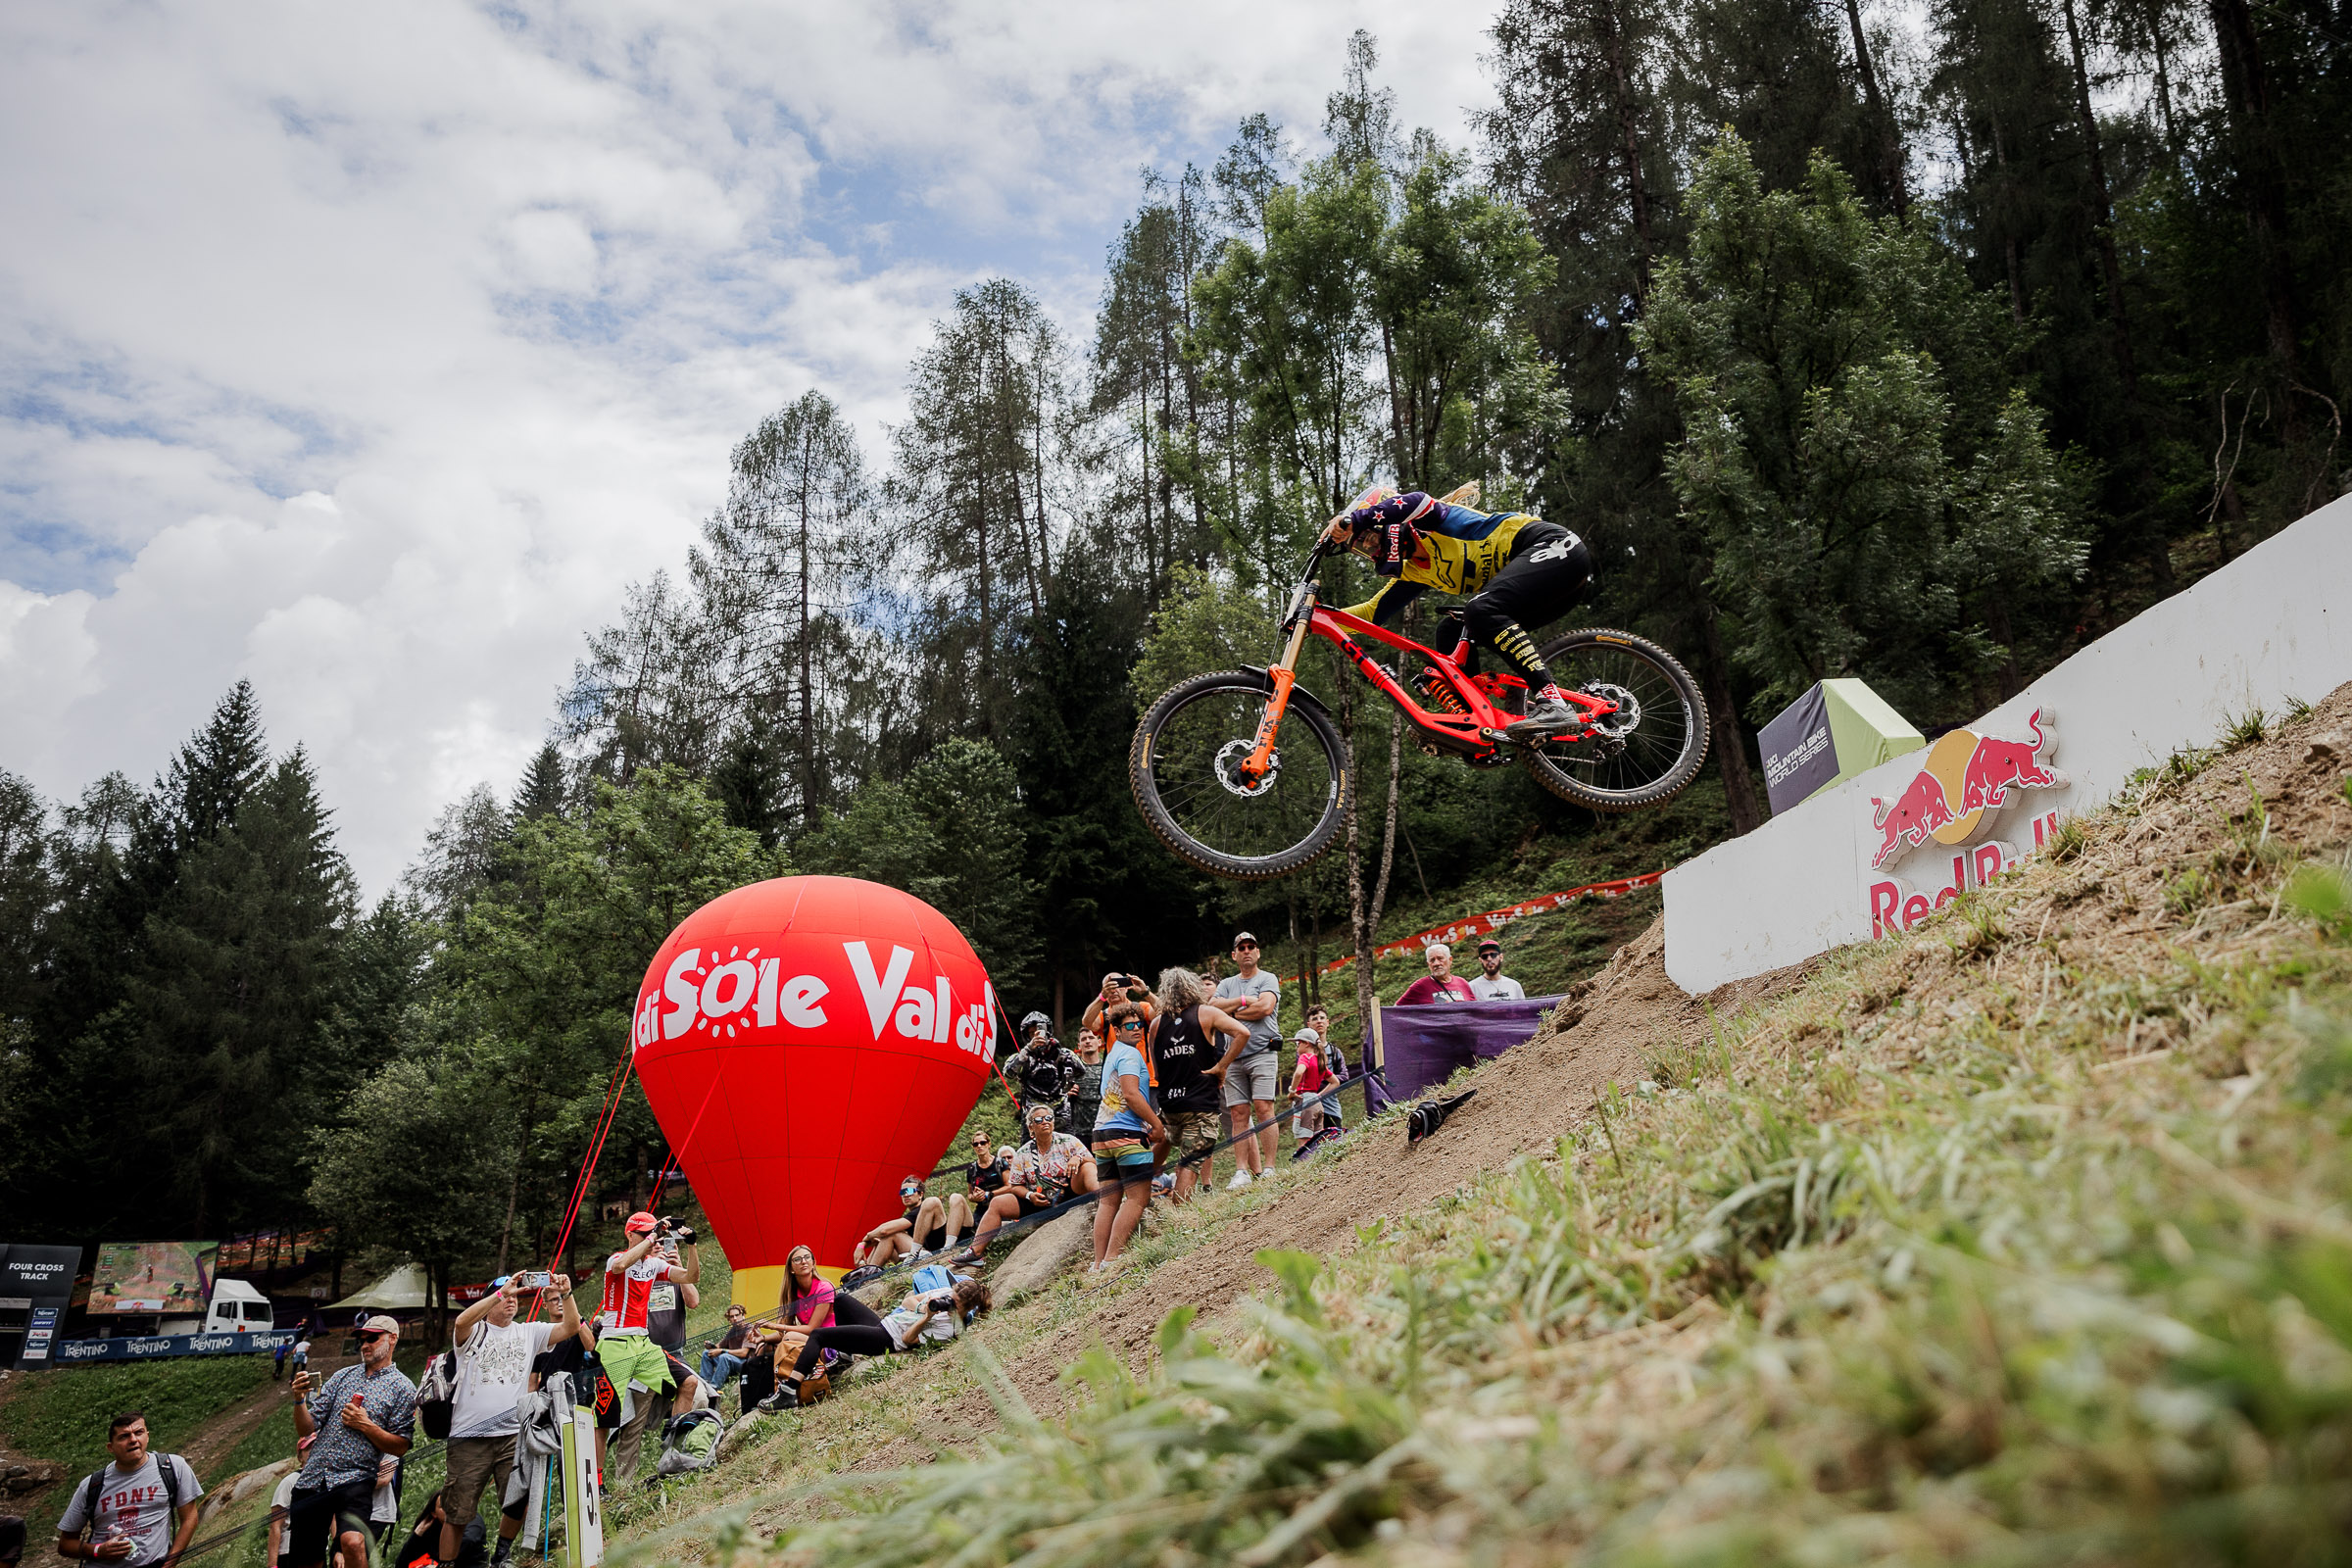 VAL DI SOLE READY TO GIVE A WORLD CLASS WELCOME TO CROSS-COUNTRY AND DOWNHILL STARS THIS WEEKEND